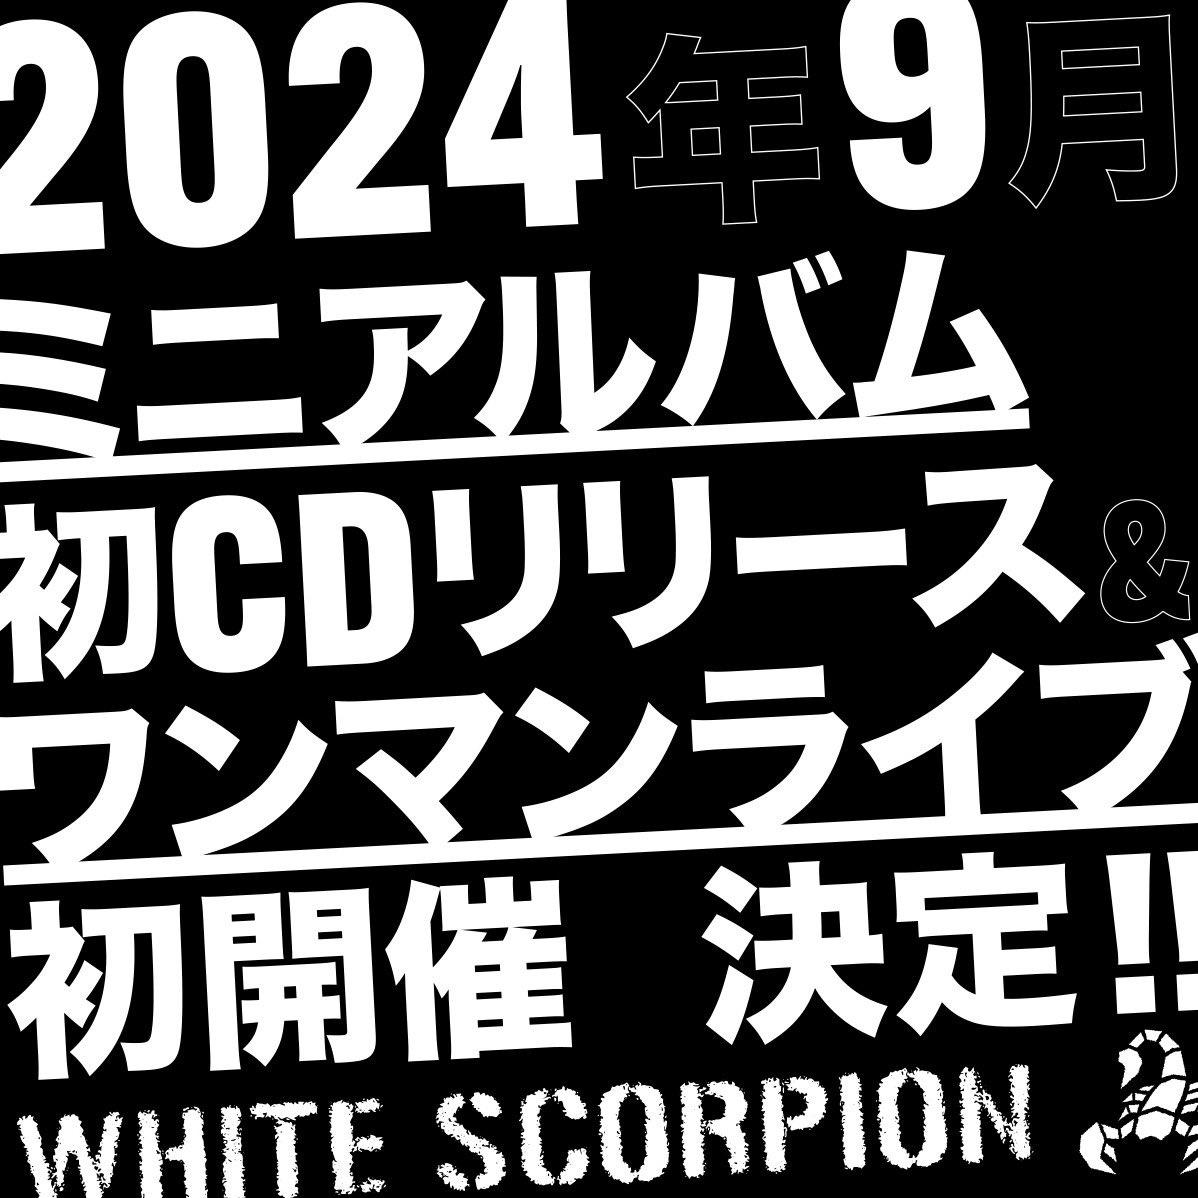 WHITE SCORPION, one of the latest Akimoto Yasushi projects, has announced they will release their first mini album this September @whsp_official #WHITESCORPION #WHSP